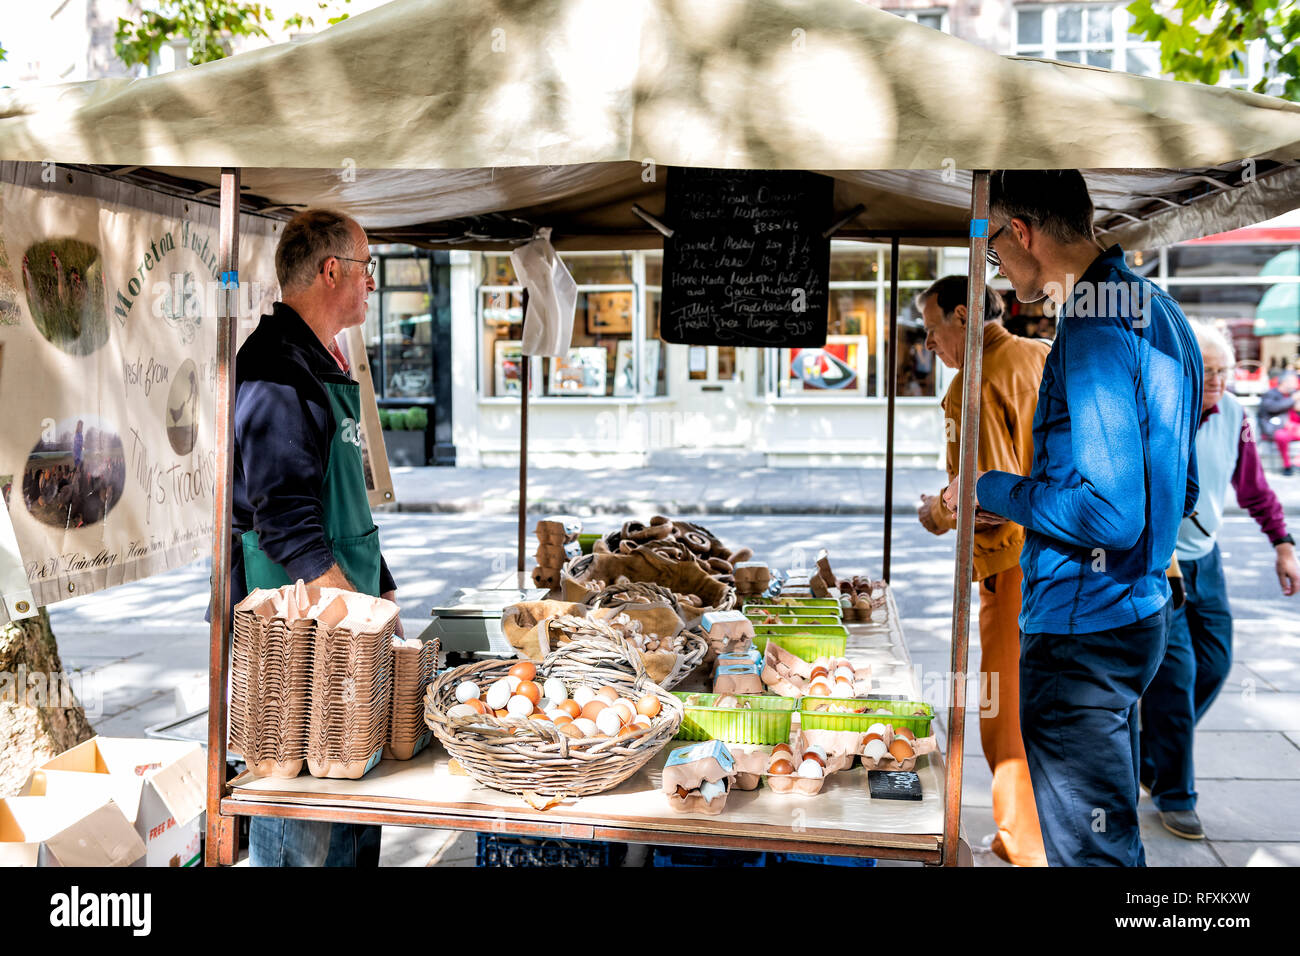 London, UK - September 15, 2018: Neighborhood market in Pimlico with standing on street road at fresh eggs vendor stand with customers Stock Photo